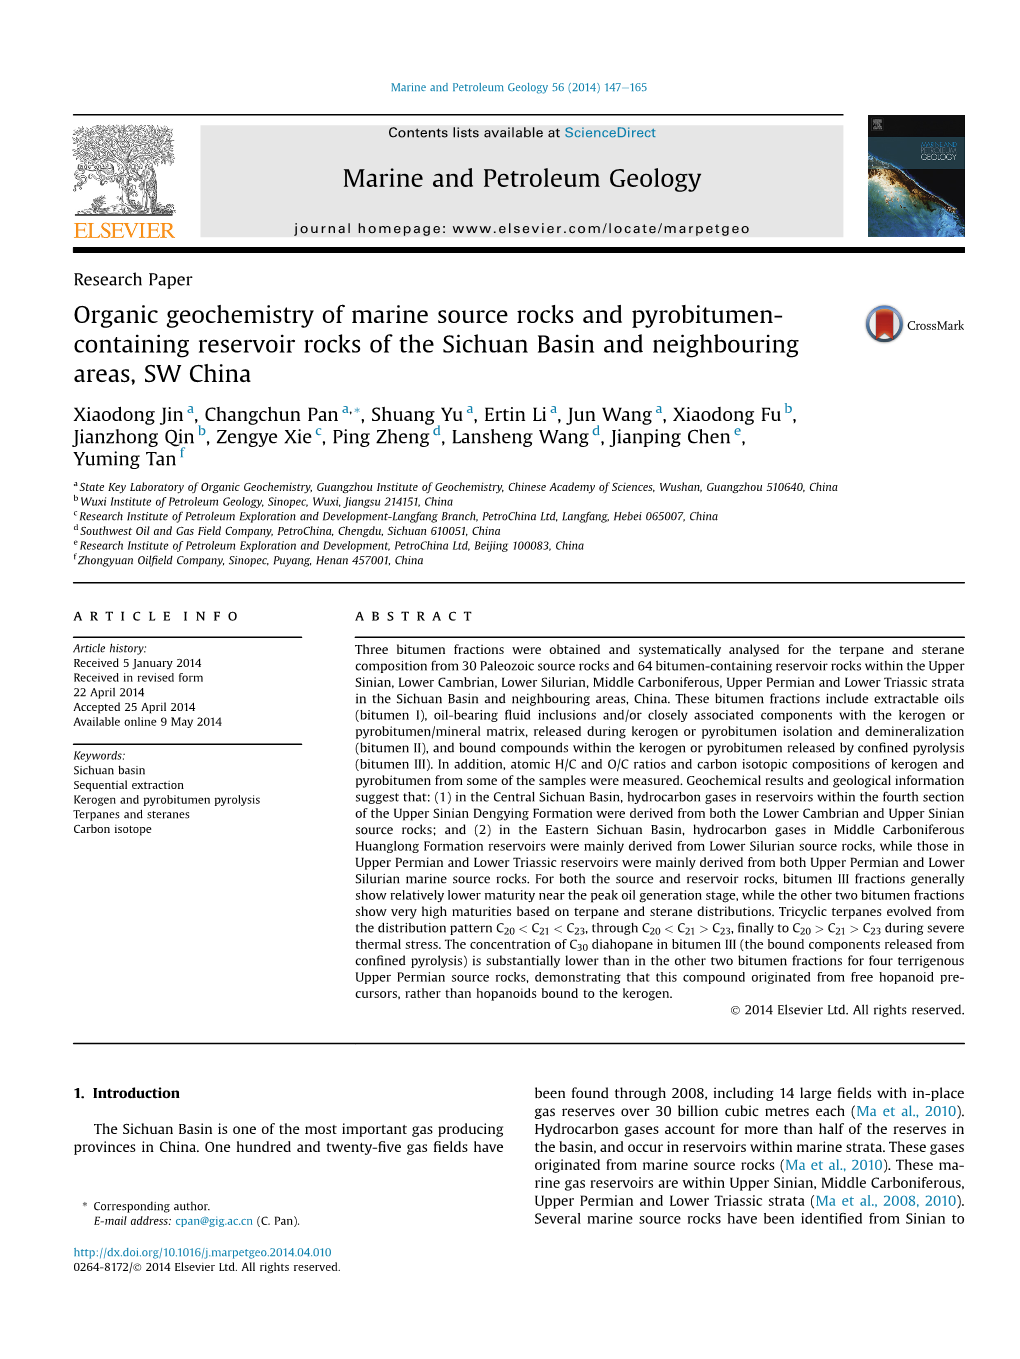 Organic Geochemistry of Marine Source Rocks and Pyrobitumen- Containing Reservoir Rocks of the Sichuan Basin and Neighbouring Areas, SW China